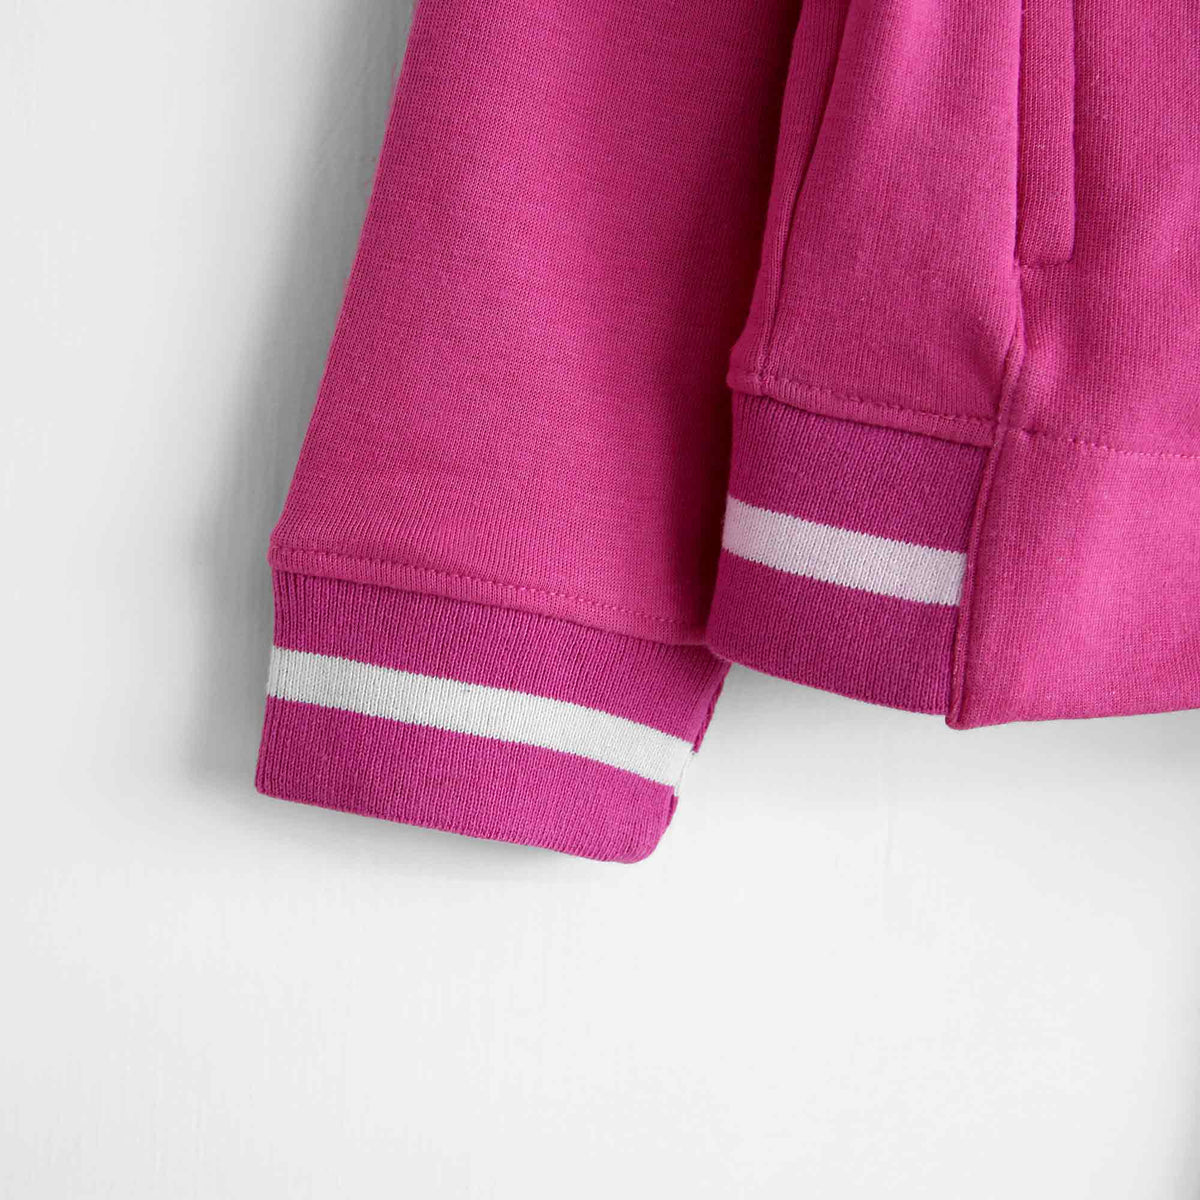 Premium Quality Slim Fit Pink Tracksuit For Girls